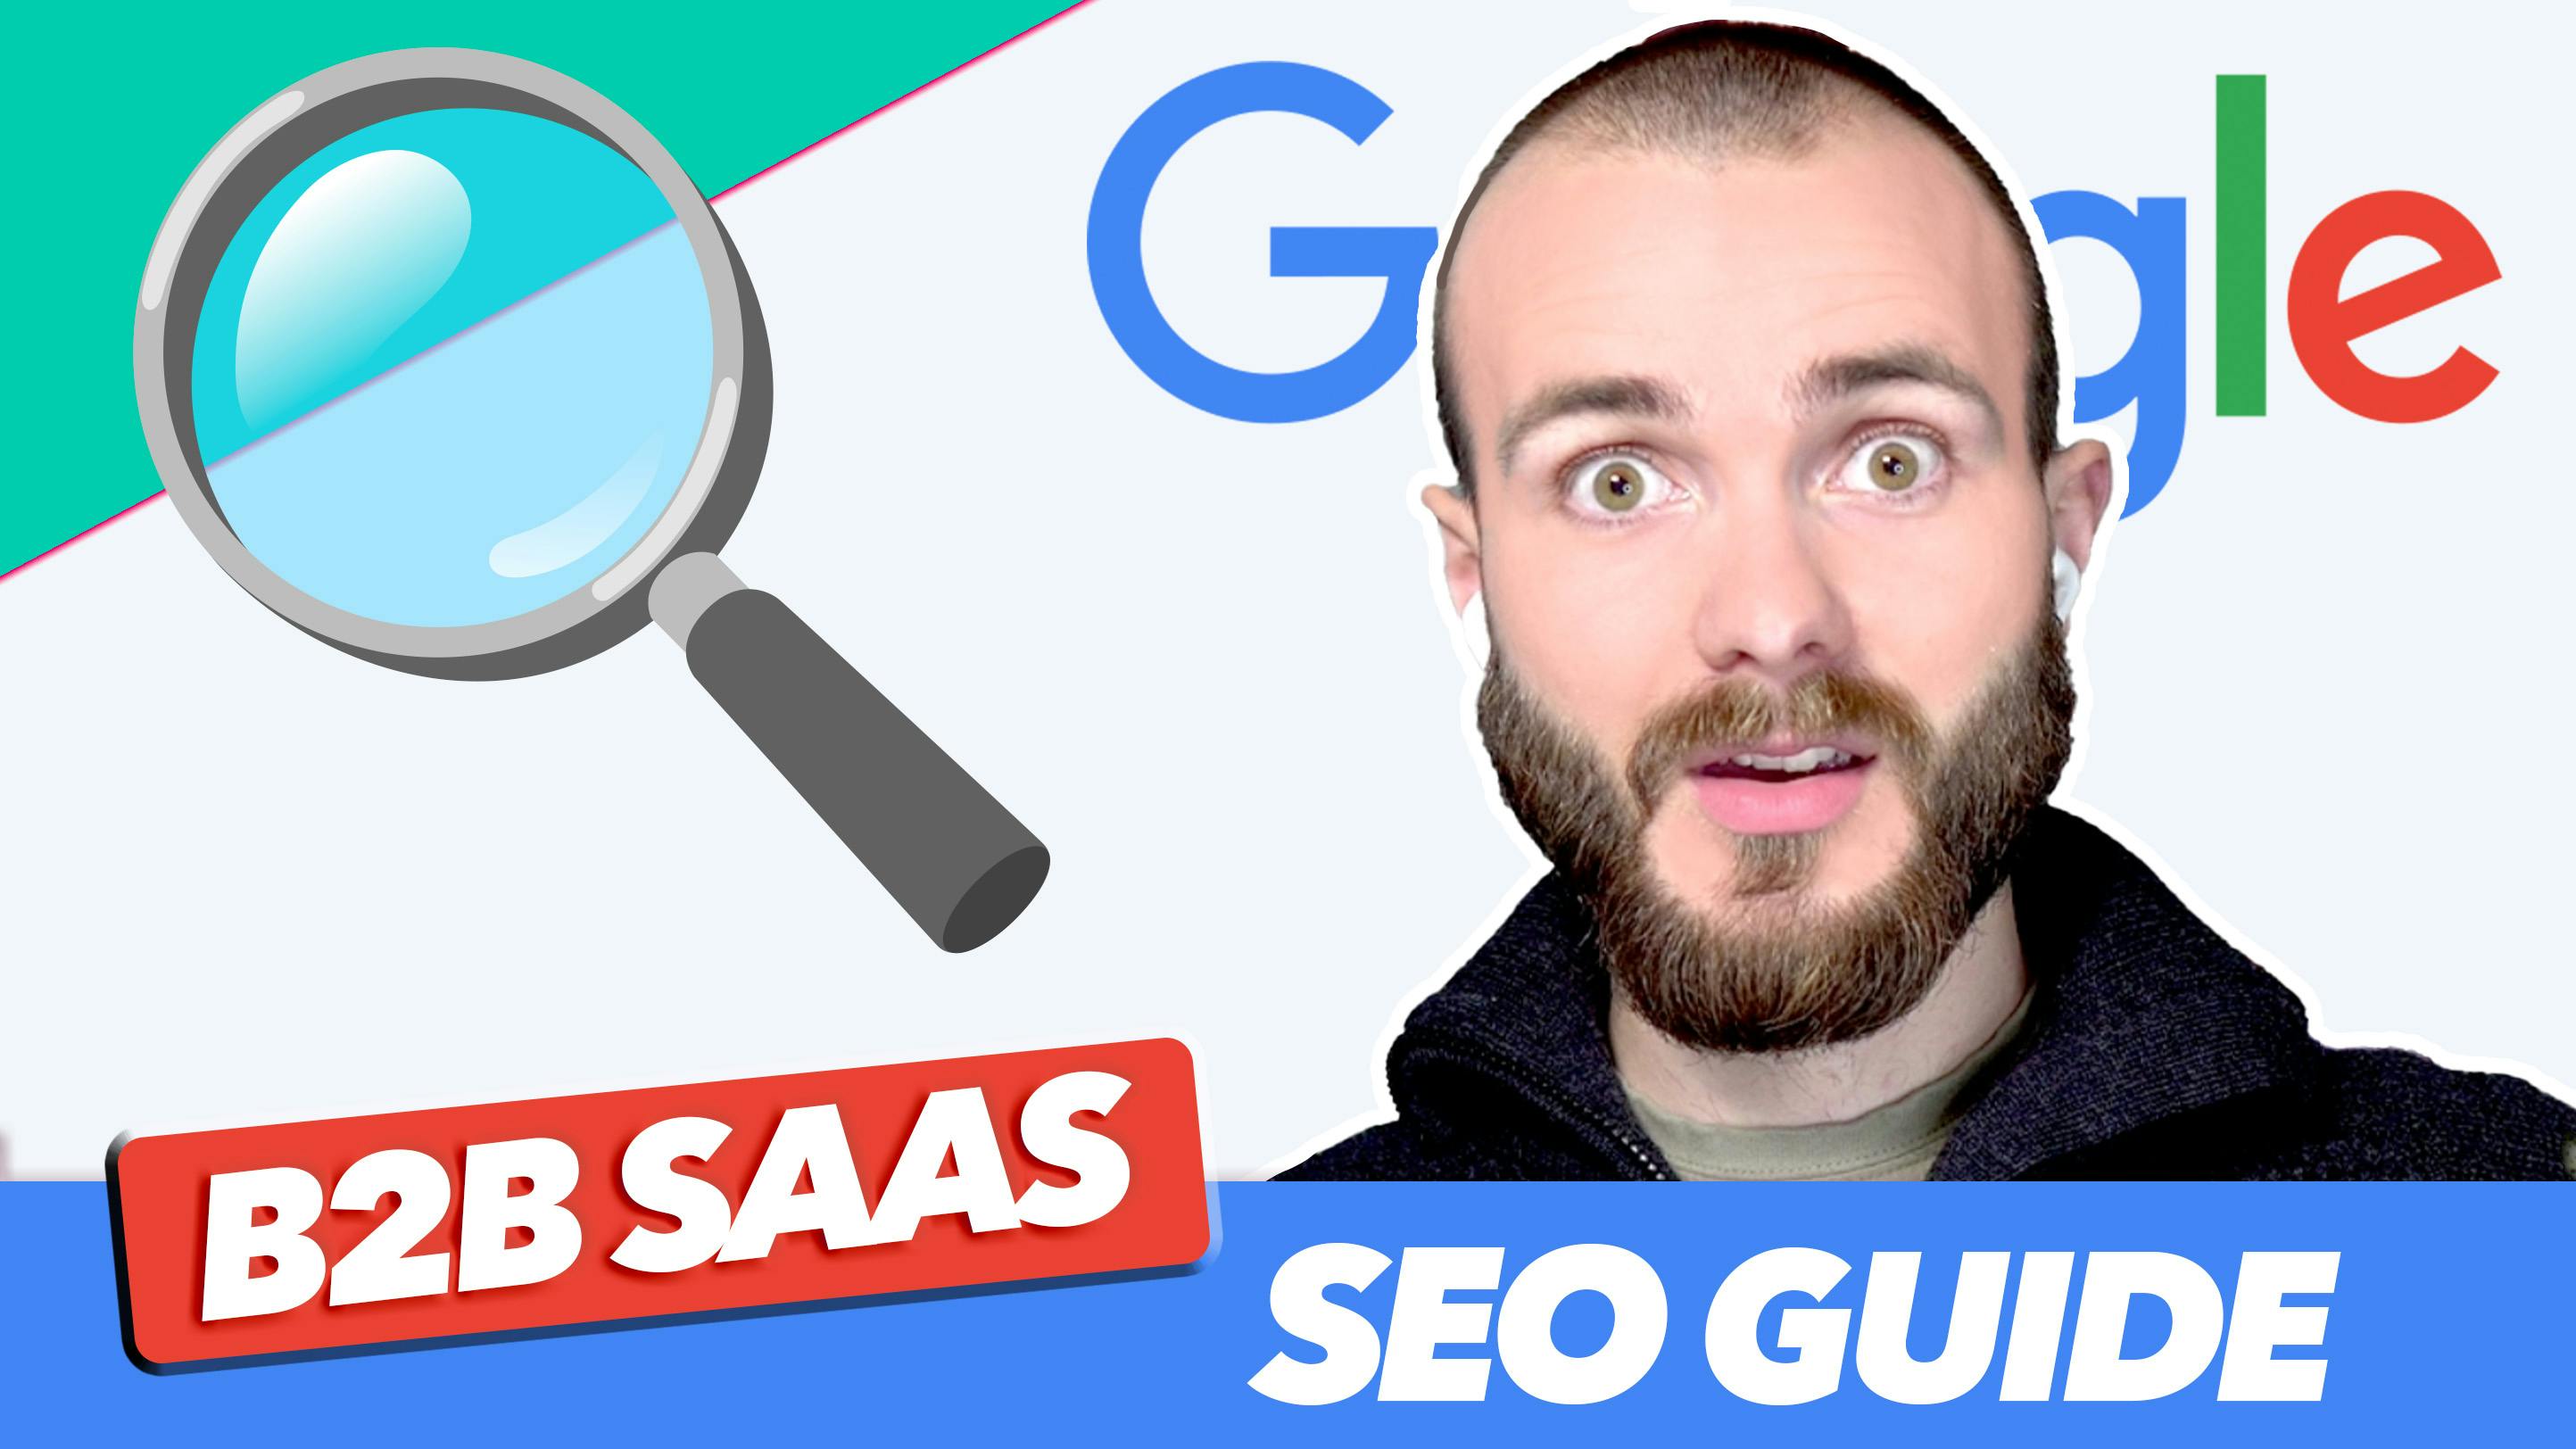 Make it to the top of the SERP and grow your B2B SaaS organically using SEO. In this guide you will learn how to capture demand, tips on how to write content to please Google, and optimize to win the searches in your niche.